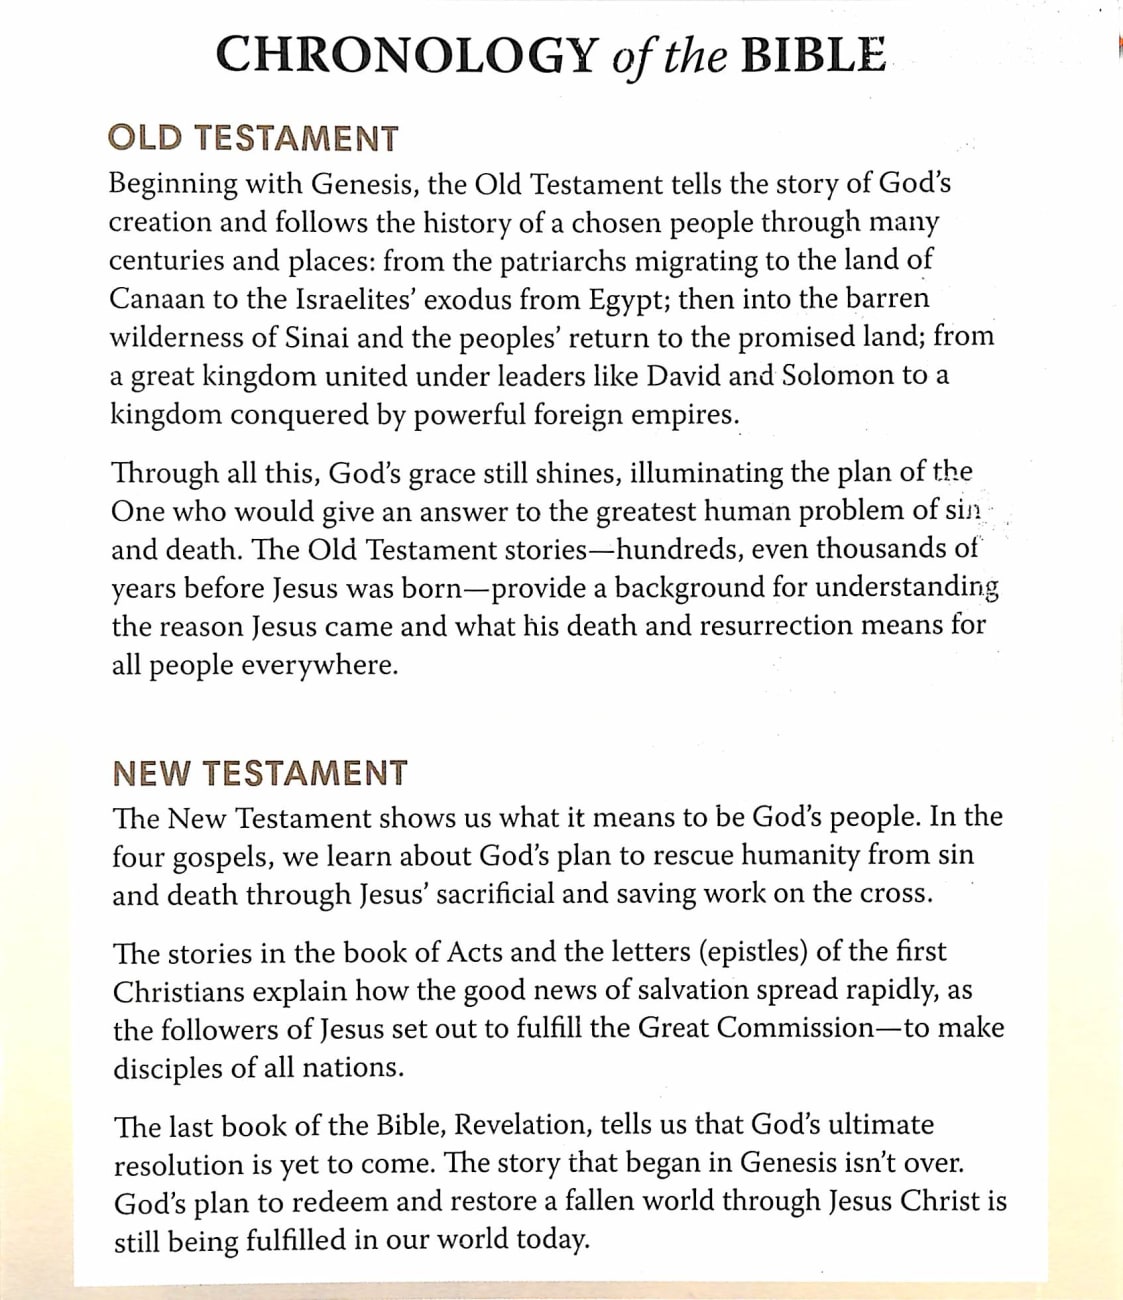 Chronology of the Bible Pamphlet